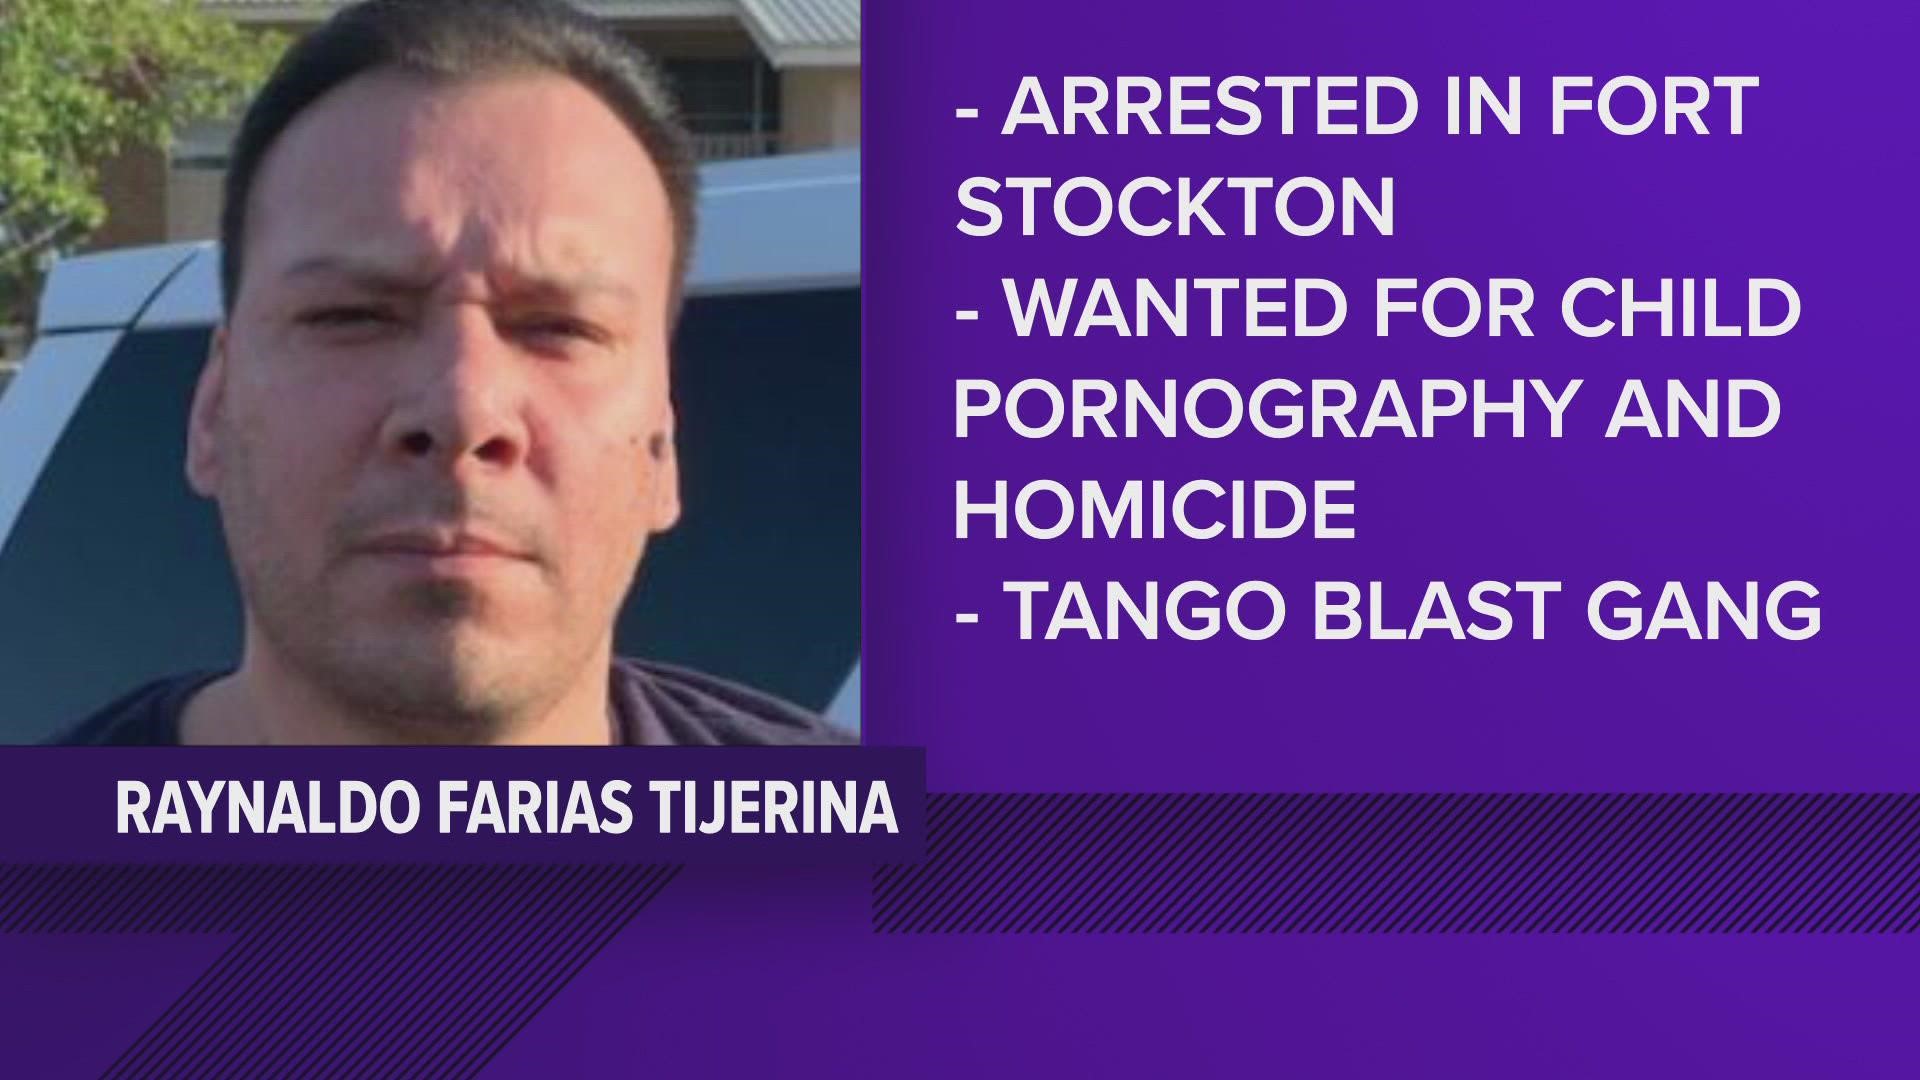 Raynaldo Farias Tijerina was wanted for homicide, possession of child pornography and invasive visual recording.